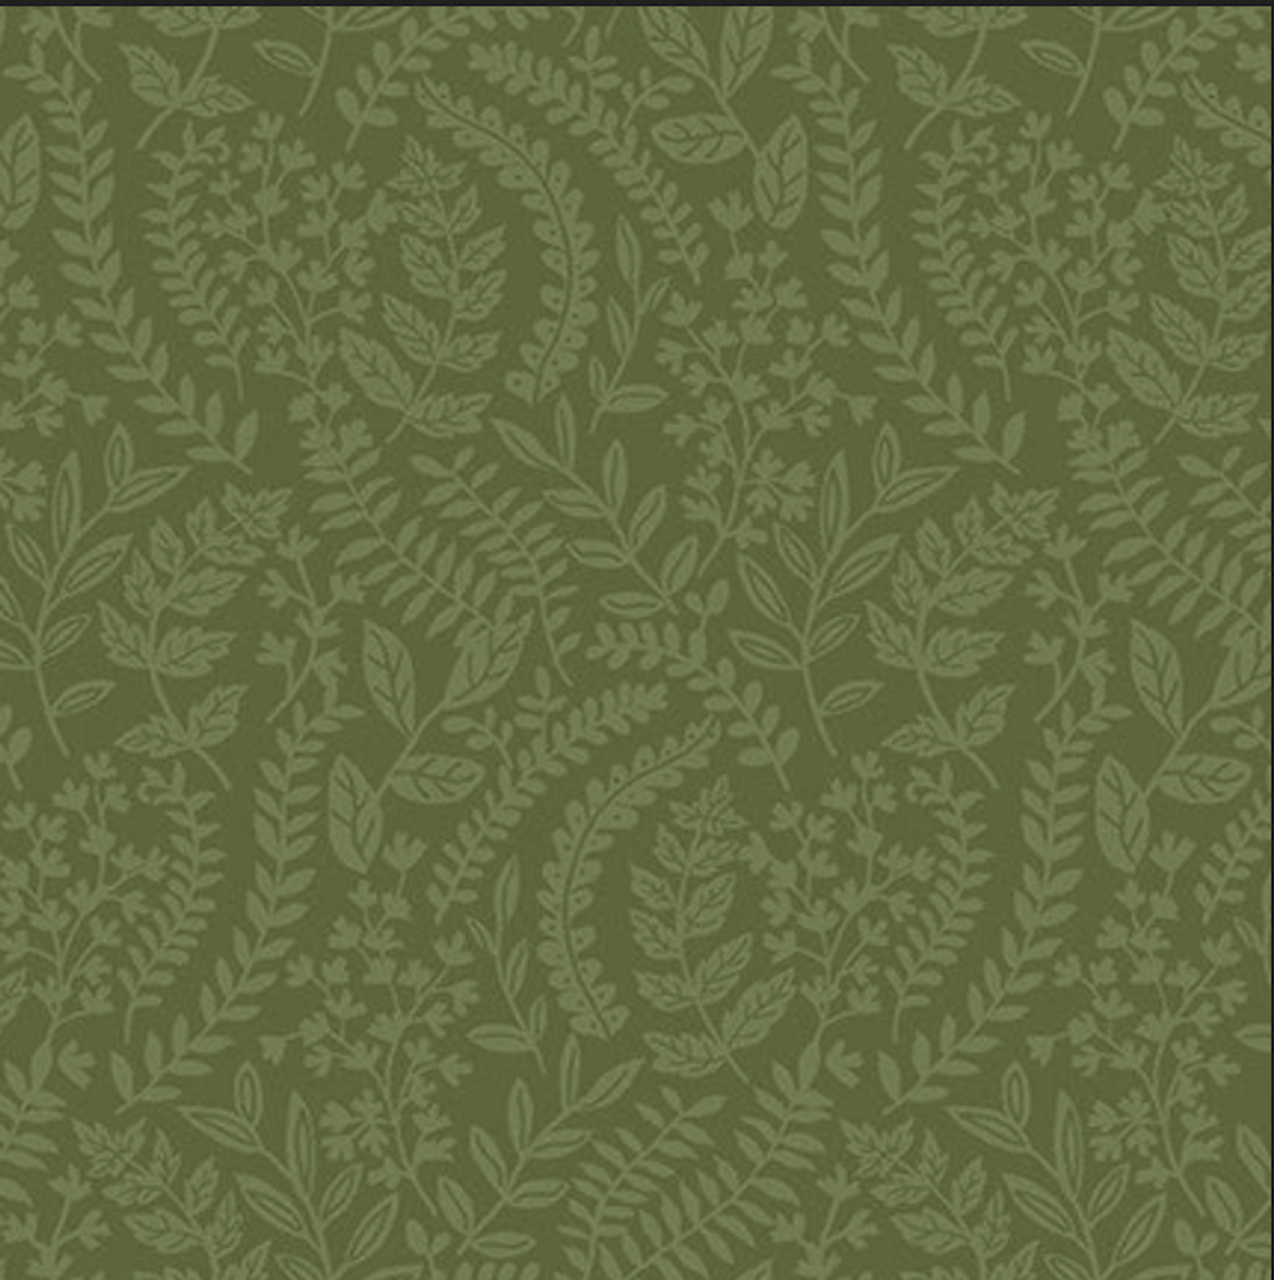 Studio E Dark Forest Tone On Tone Leaves Green Cotton Fabric by The Yard